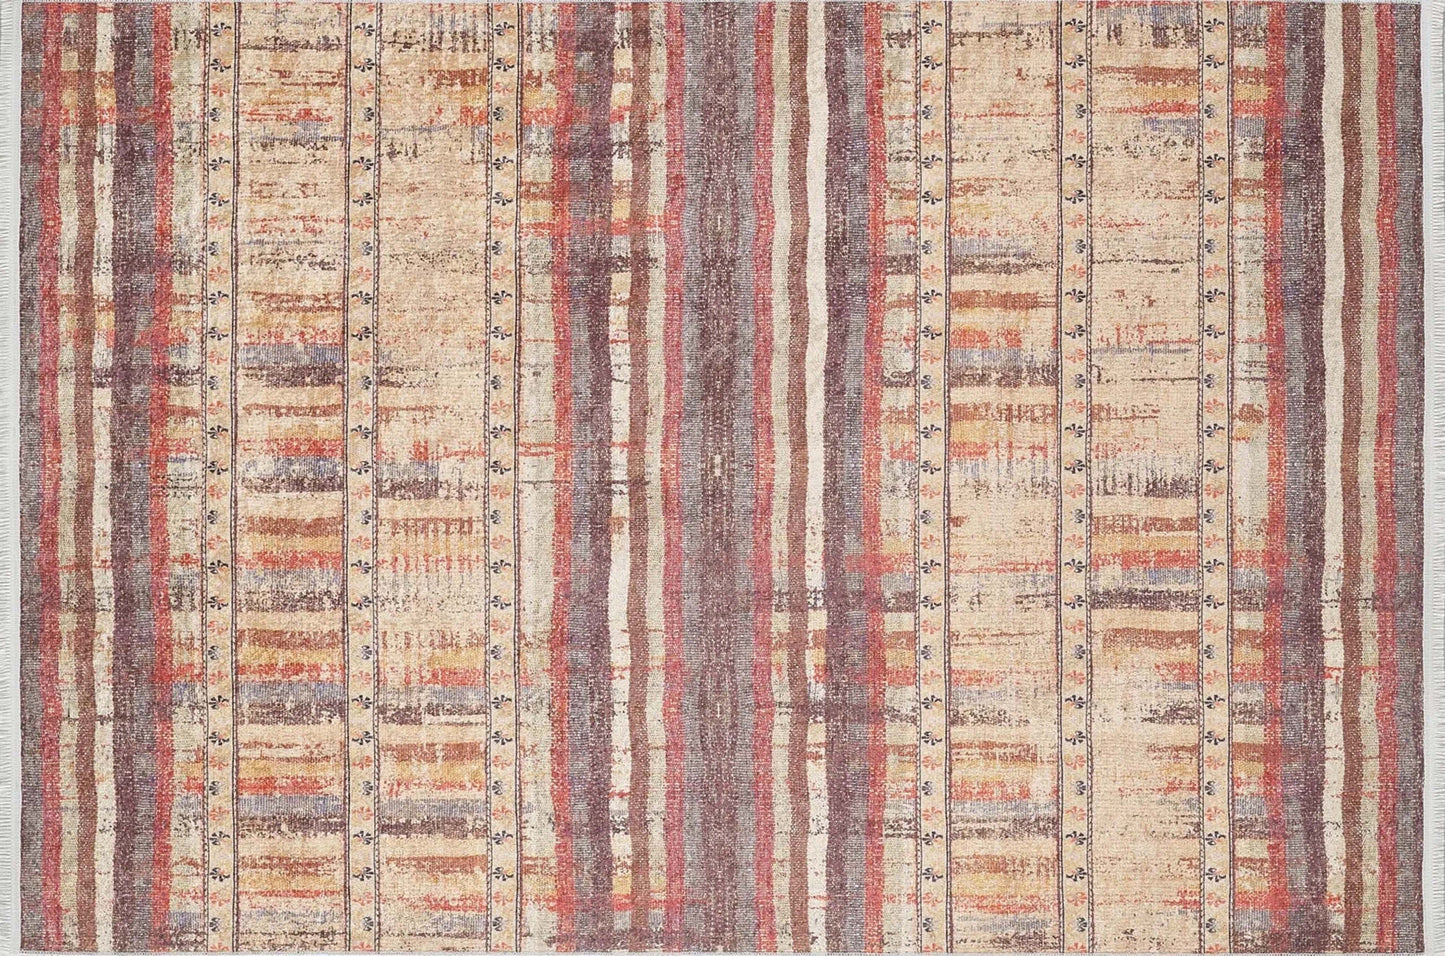 2x3 Turkish Rug, Bohemian Striped Rugs, Farmhouse Decor, Small Rugs 3x5 4x6 Home Decor Rugs for Kitchen Bathroom Bedside Entryway Laundry - famerugs